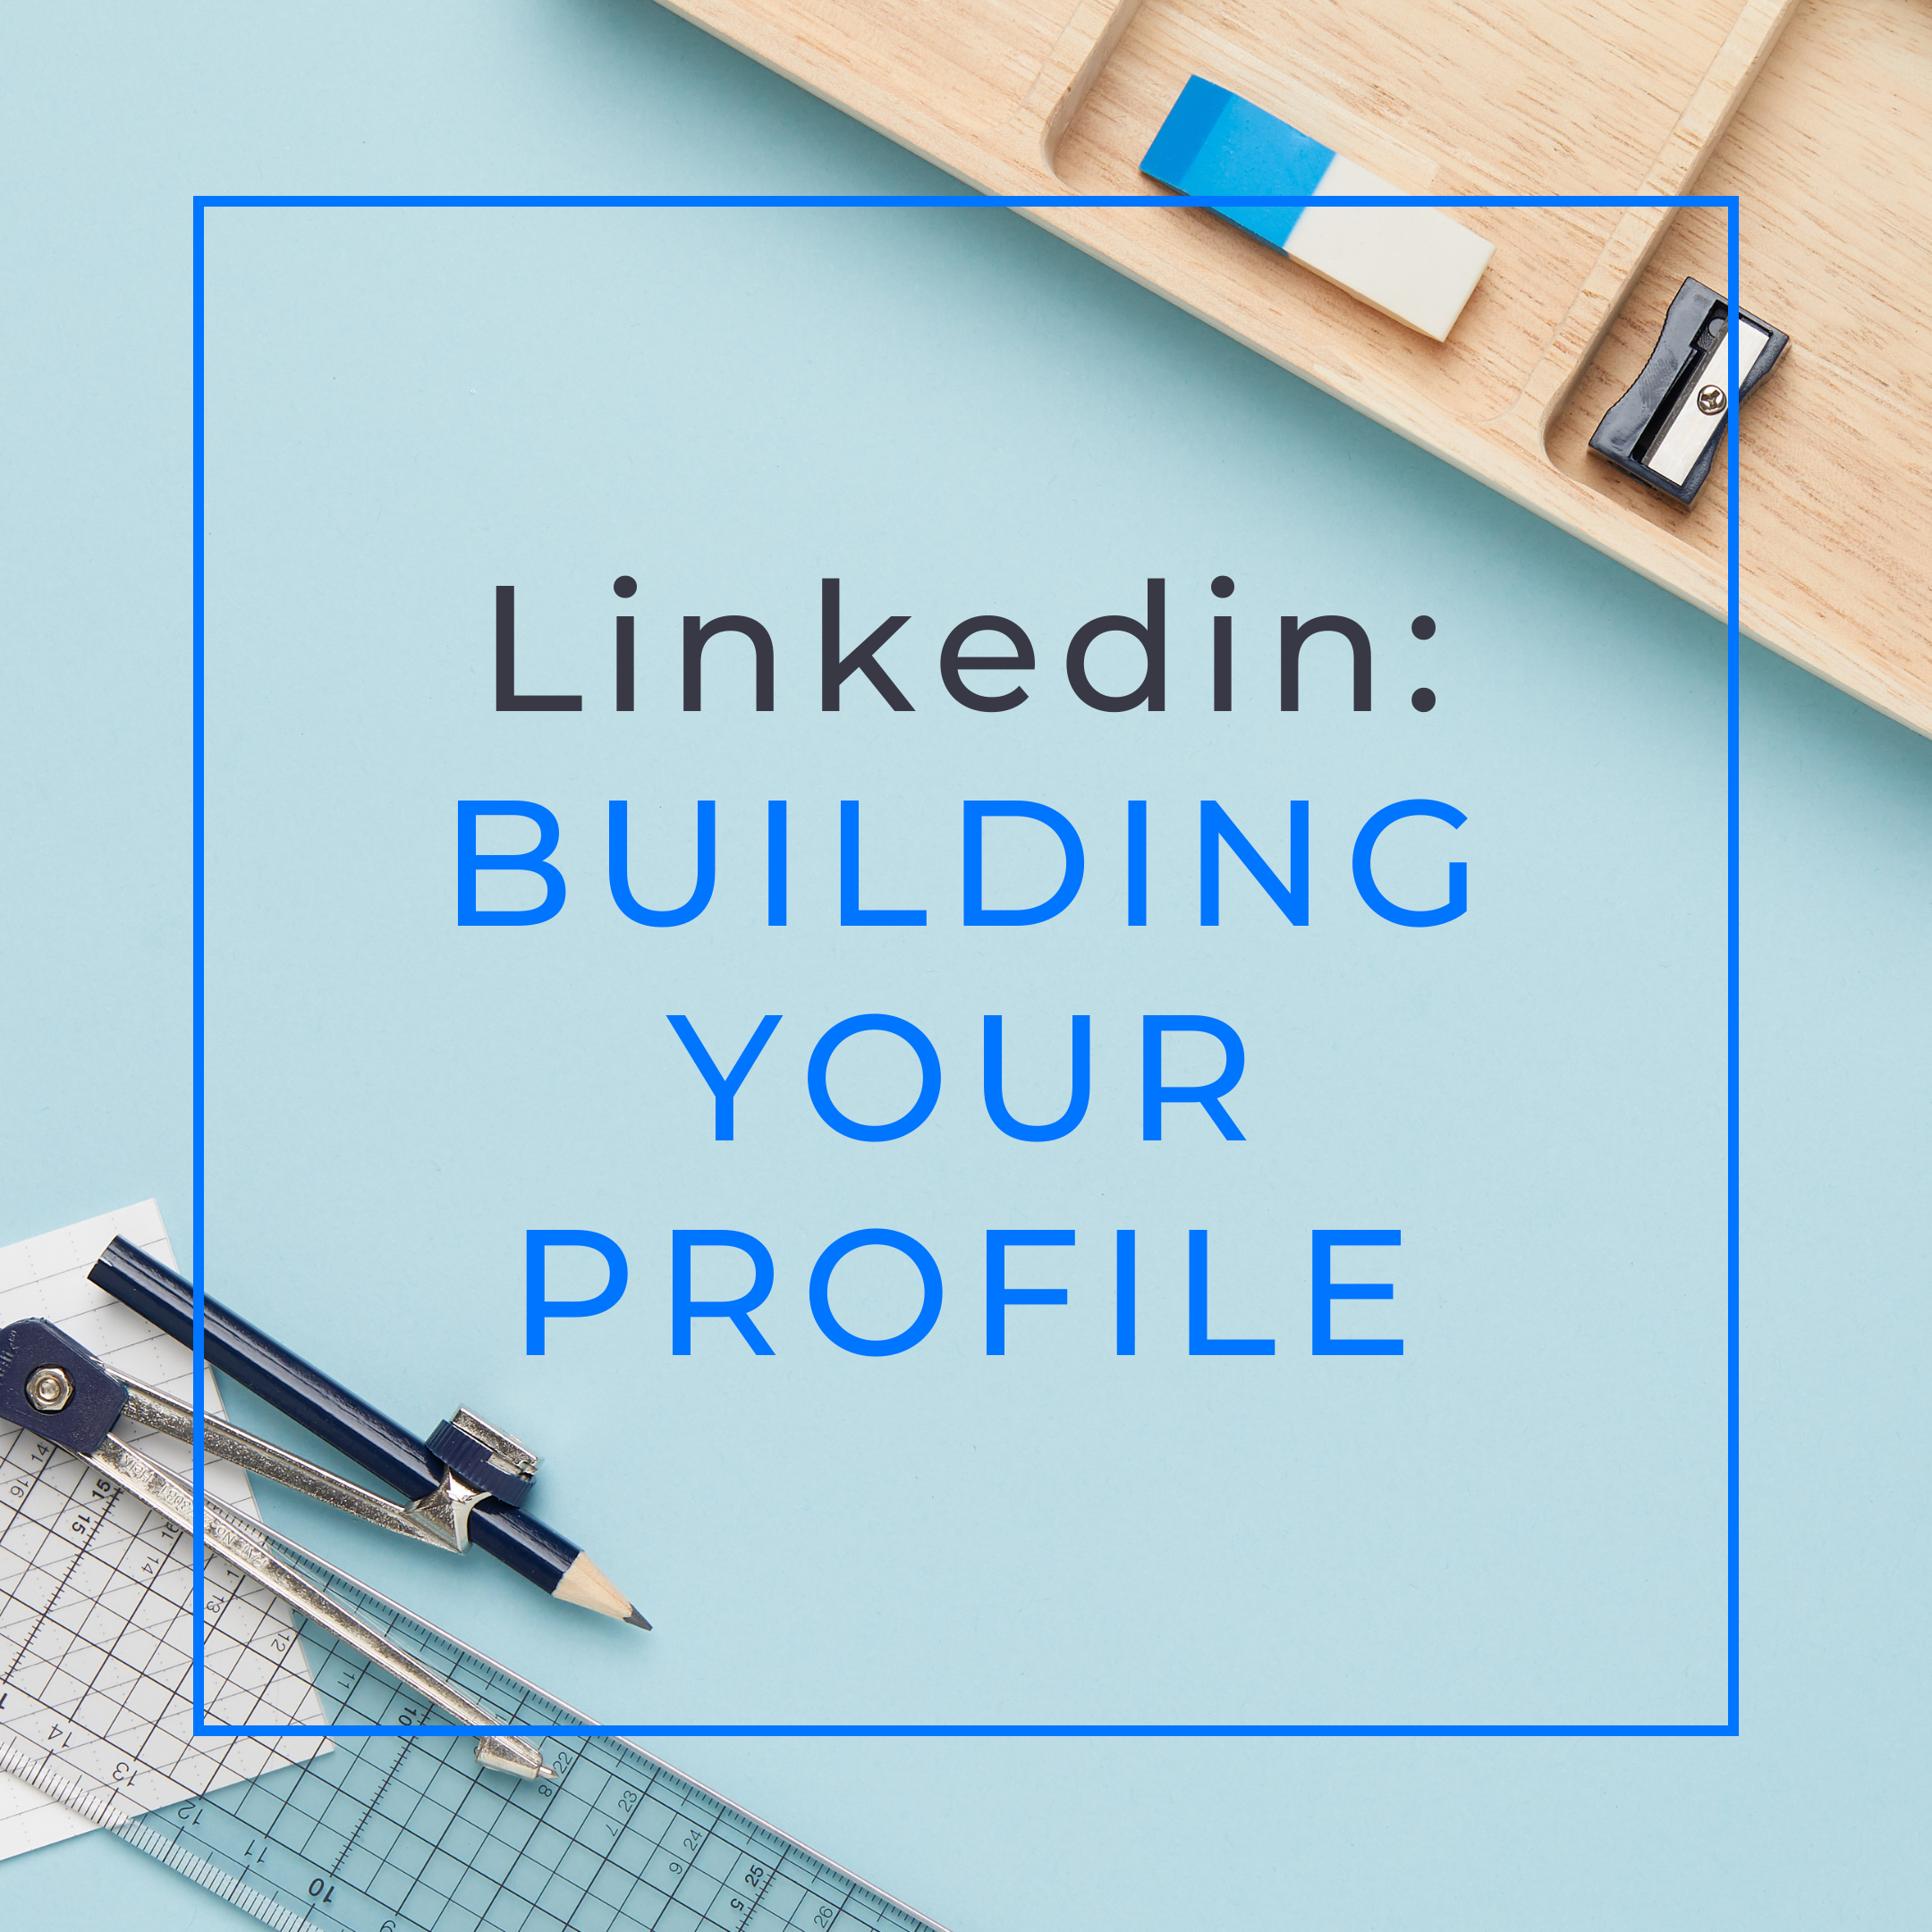 Light blue background, with math supplies in the bottom left corner, and office supplies in the top right corner. Centered is text that reads Linkedin: Building your Profile.